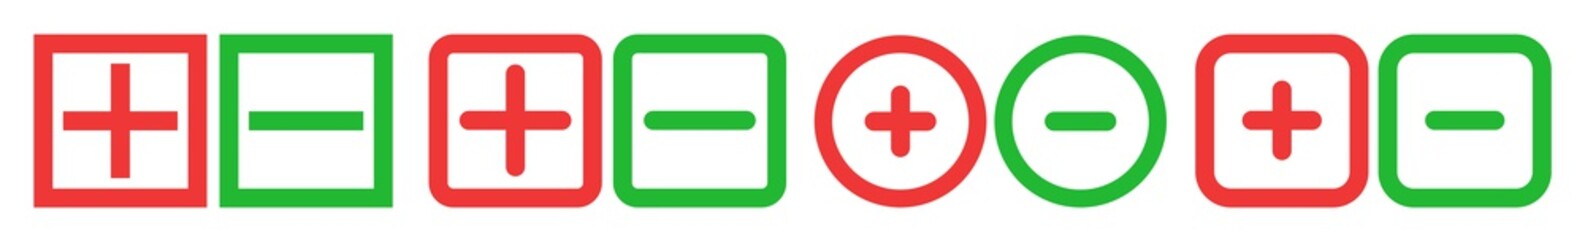 Plus Minus Icon Red Green | Positive Negative Buttons Illustration | Con Pro Symbol | Vote Logo | Zoom In Out Sign | Isolated | Variations